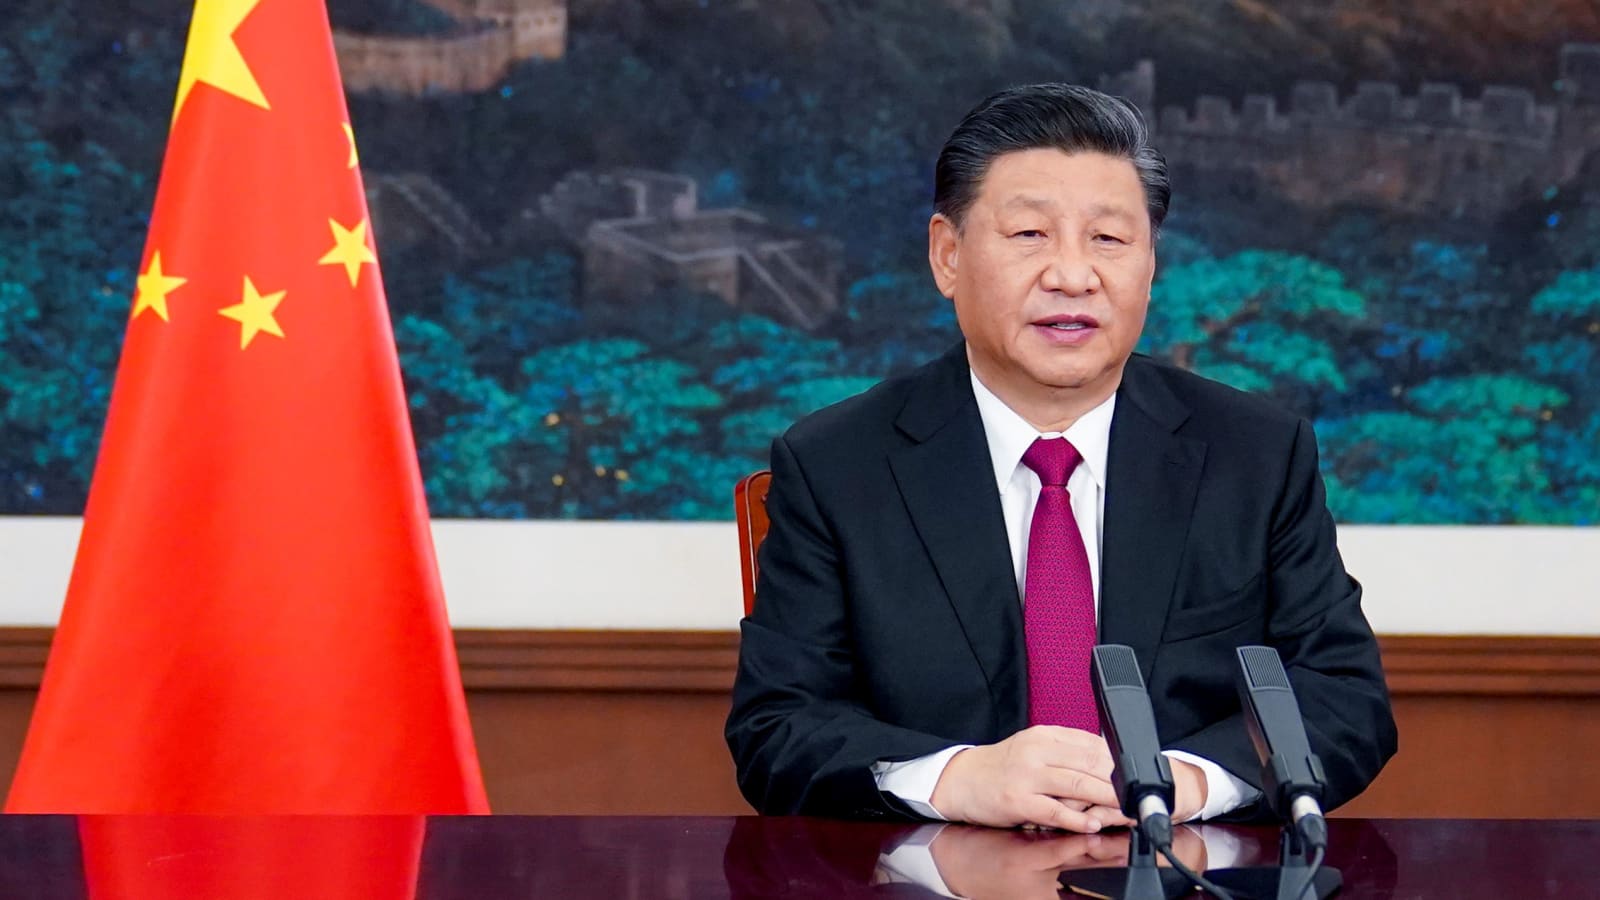 Leaked documents show Xi Jinping's direct links with crackdown on Uyghurs